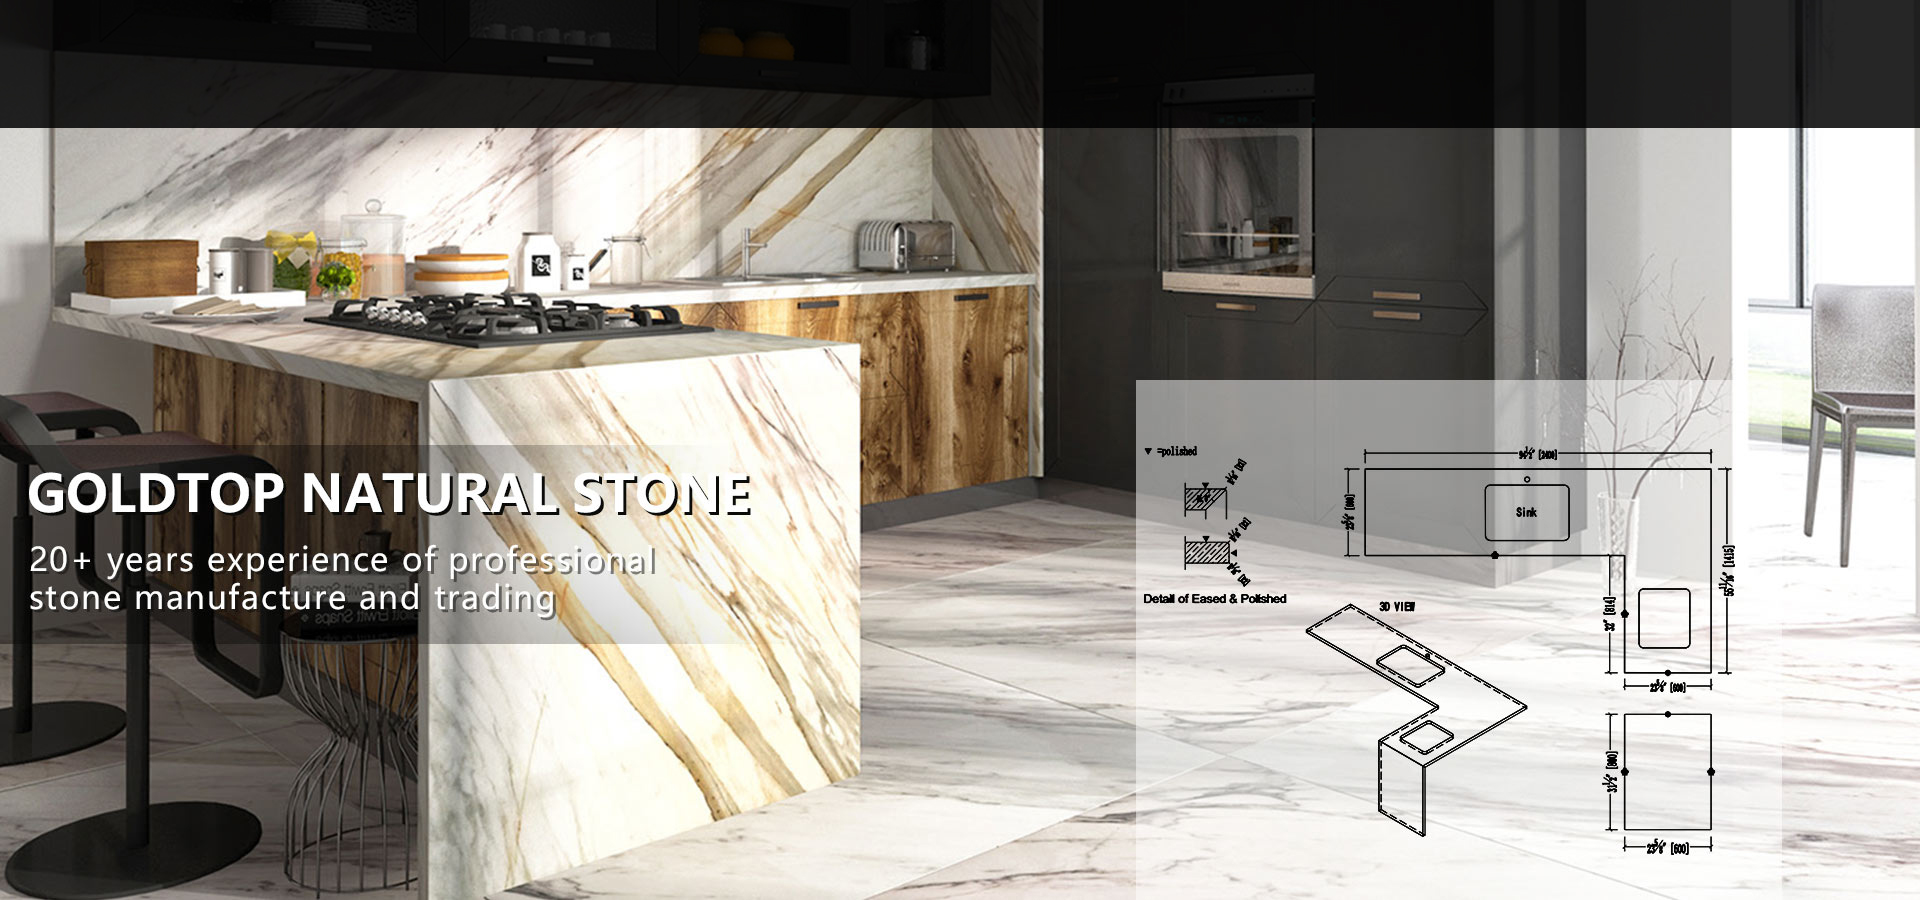 20+ years experience of professional stone manufacture and trading